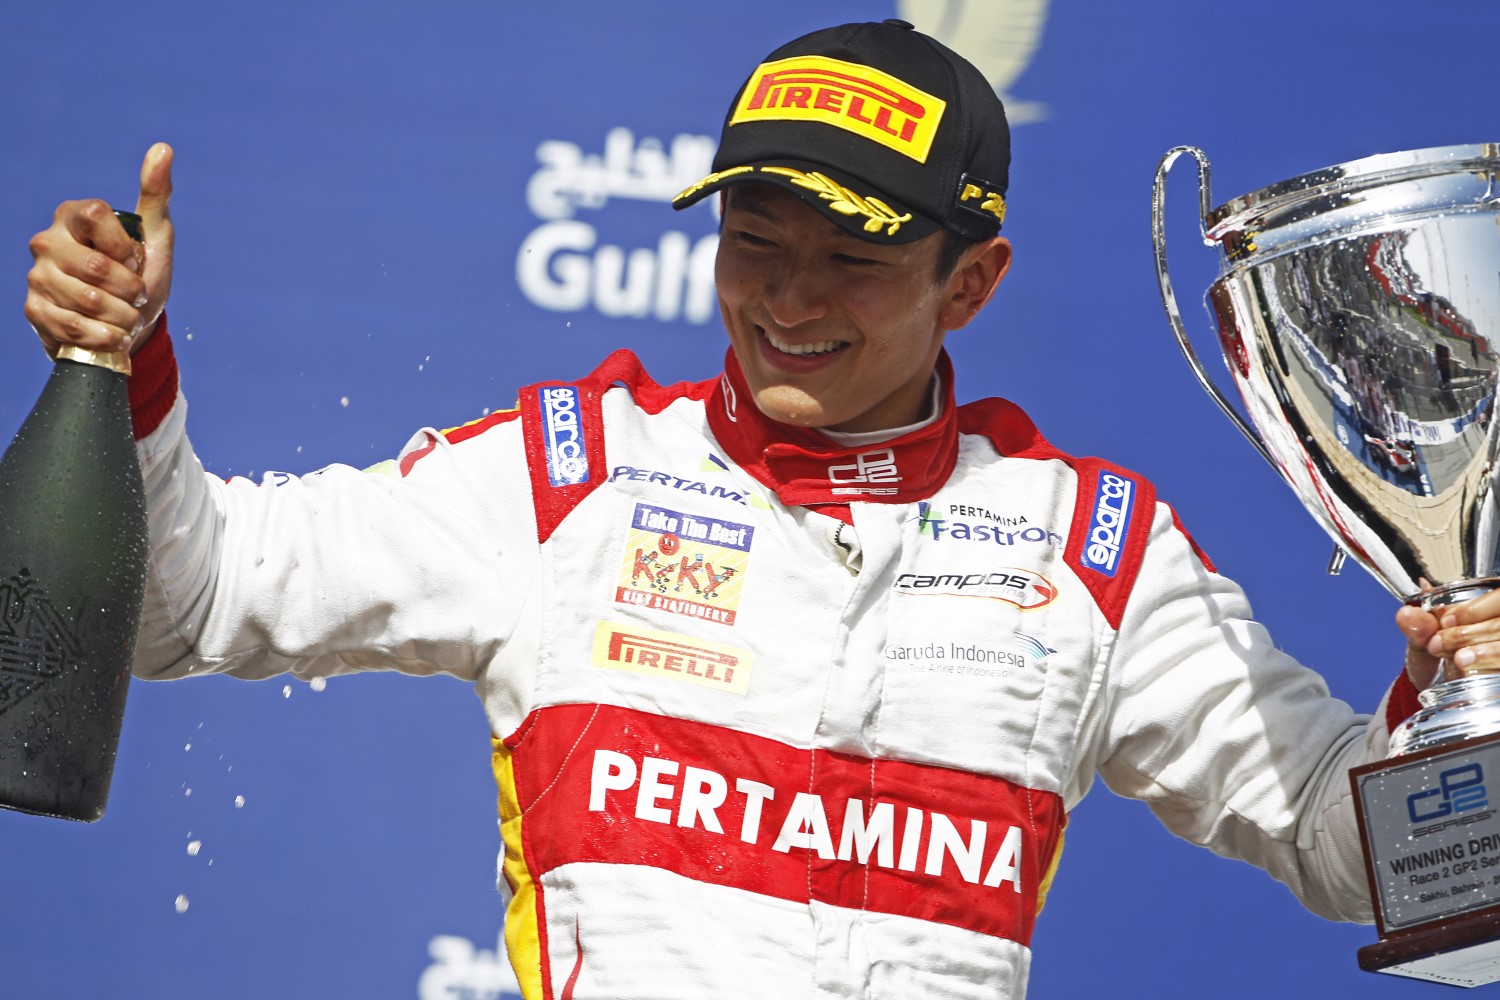 Can Rio Haryanto raise more money than Alexander Rossi and buy his way into F1?